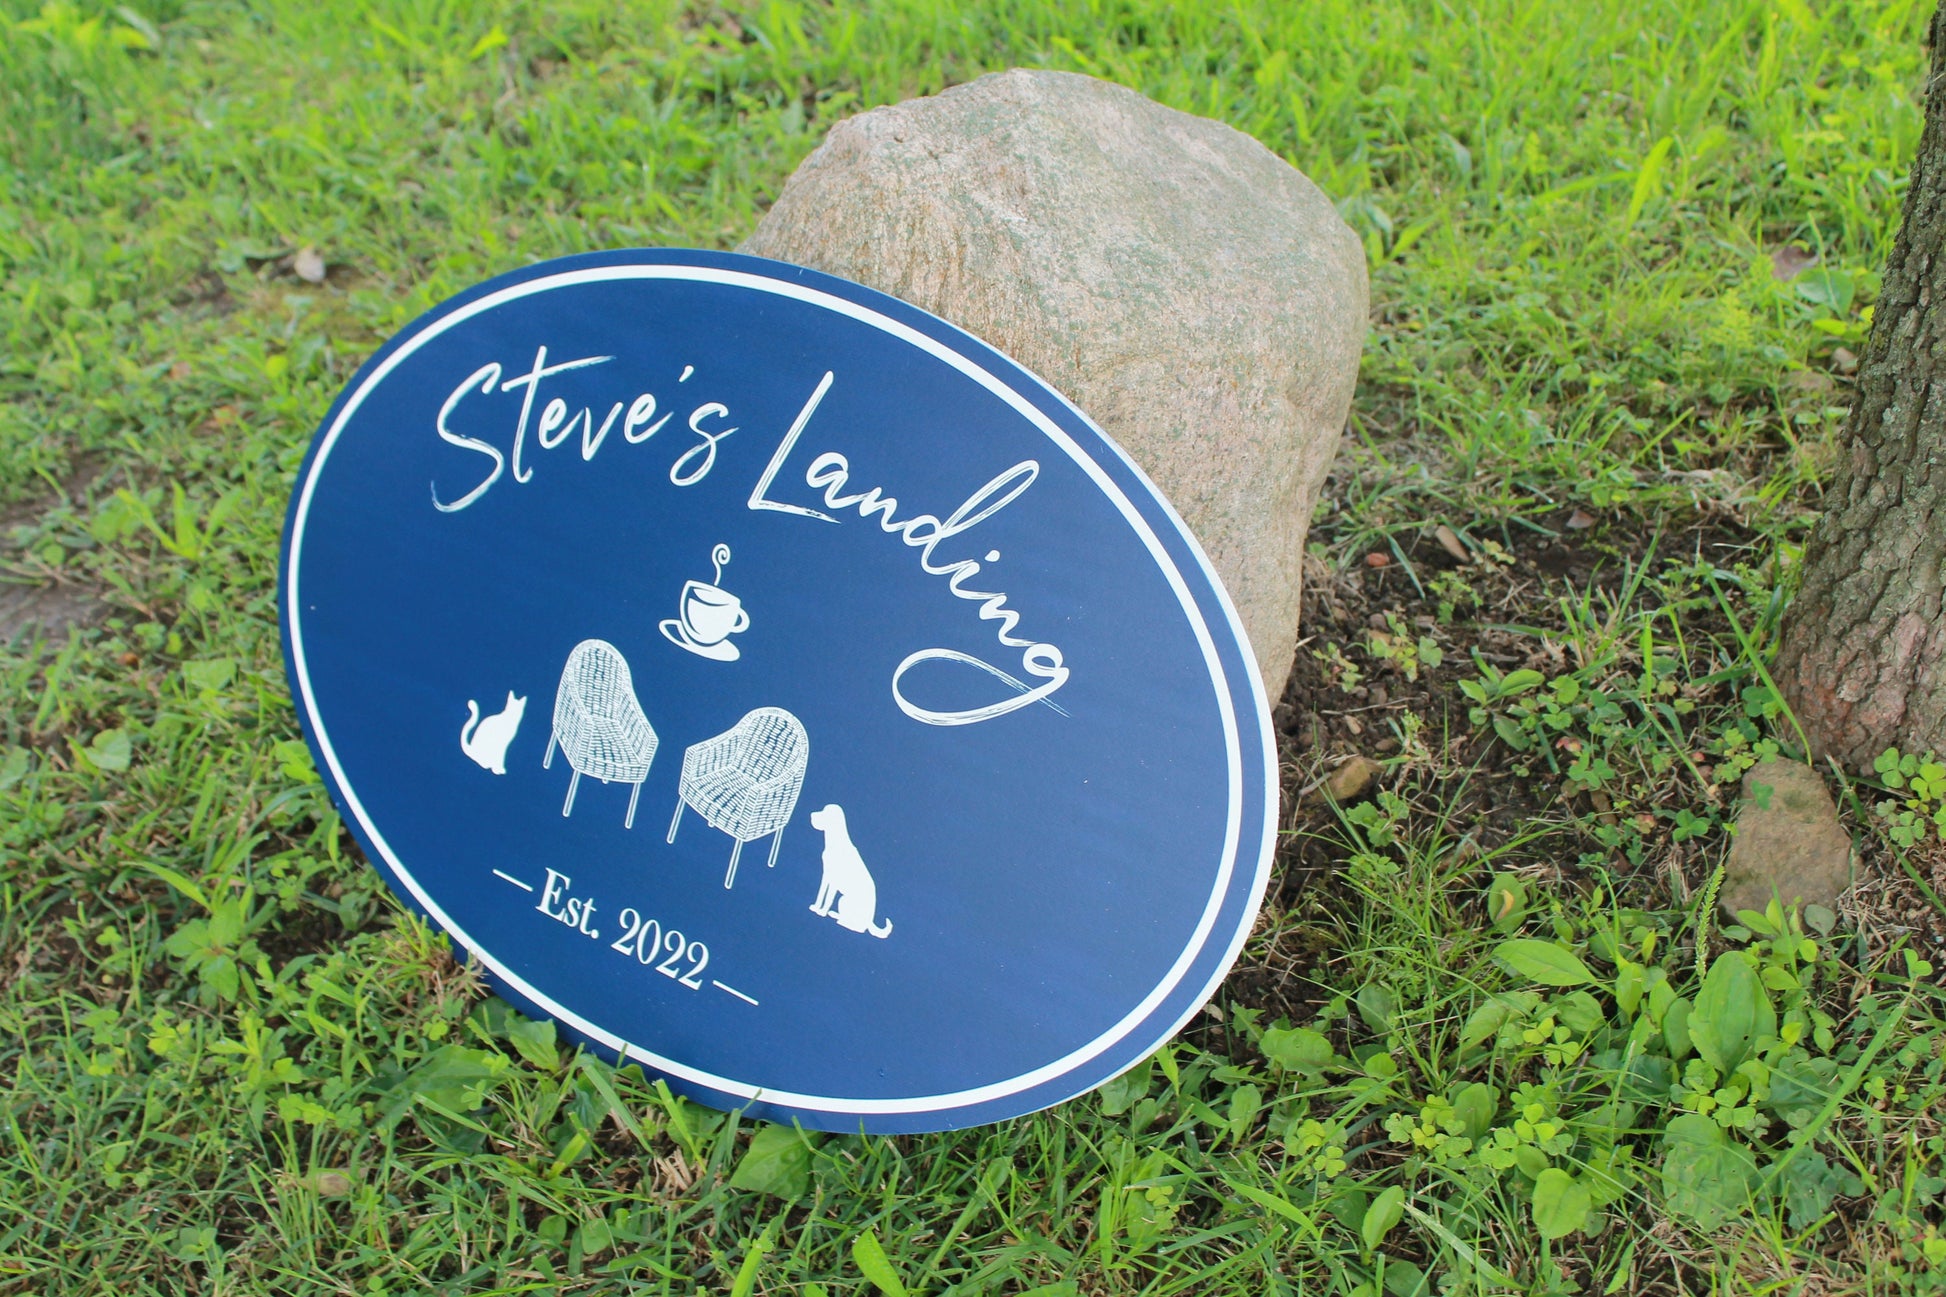 Oval PVC Weatherproof Sign Custom Plastic Smooth Personalized Beach House Lake House Get Away Great Outdoor Signage Landing Relax